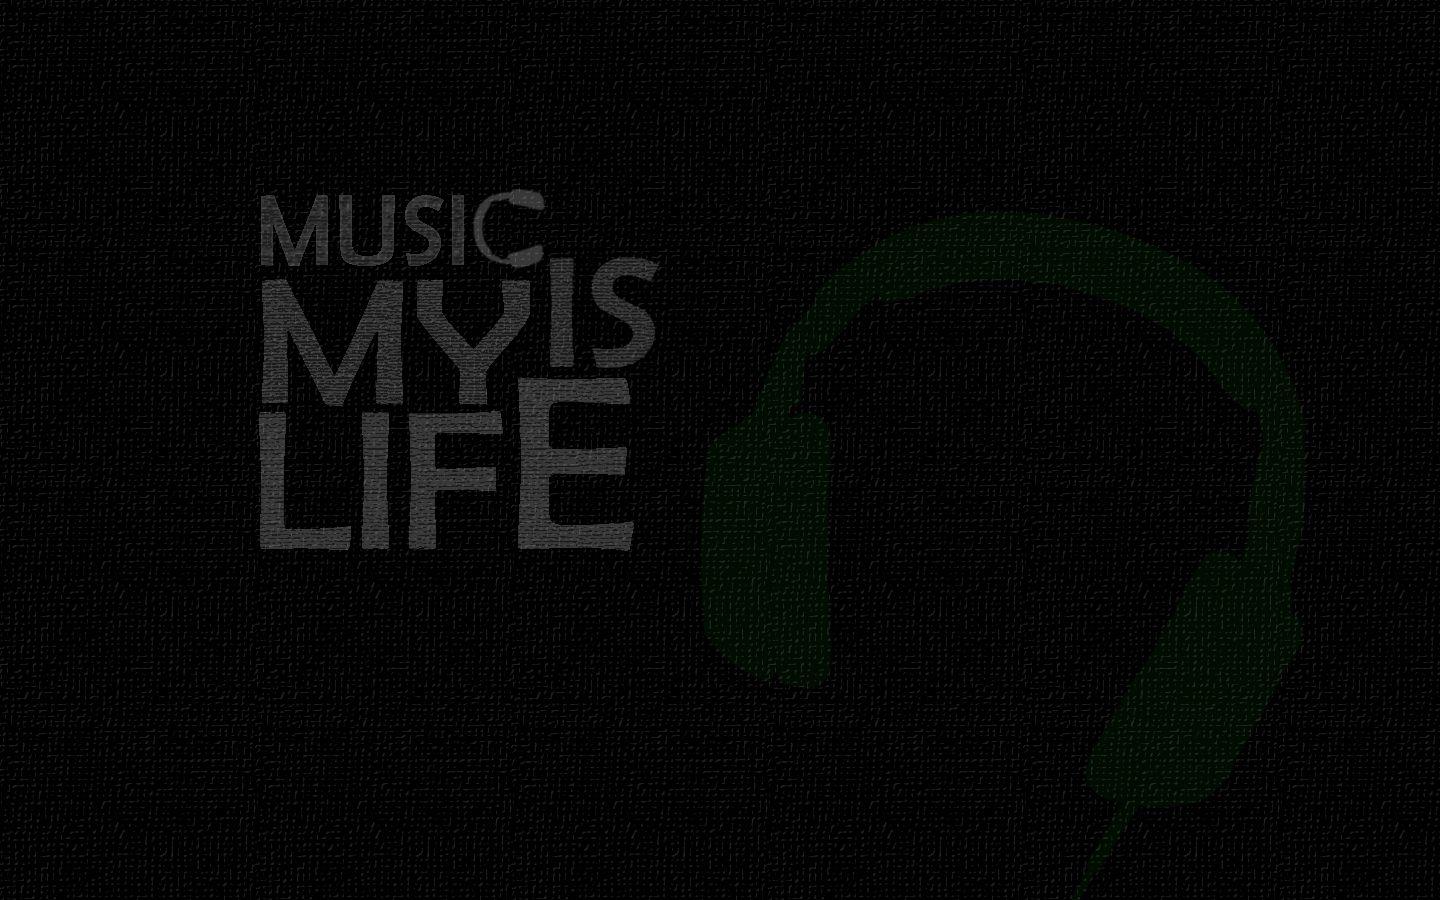 Music Is My Life by Ojan95.